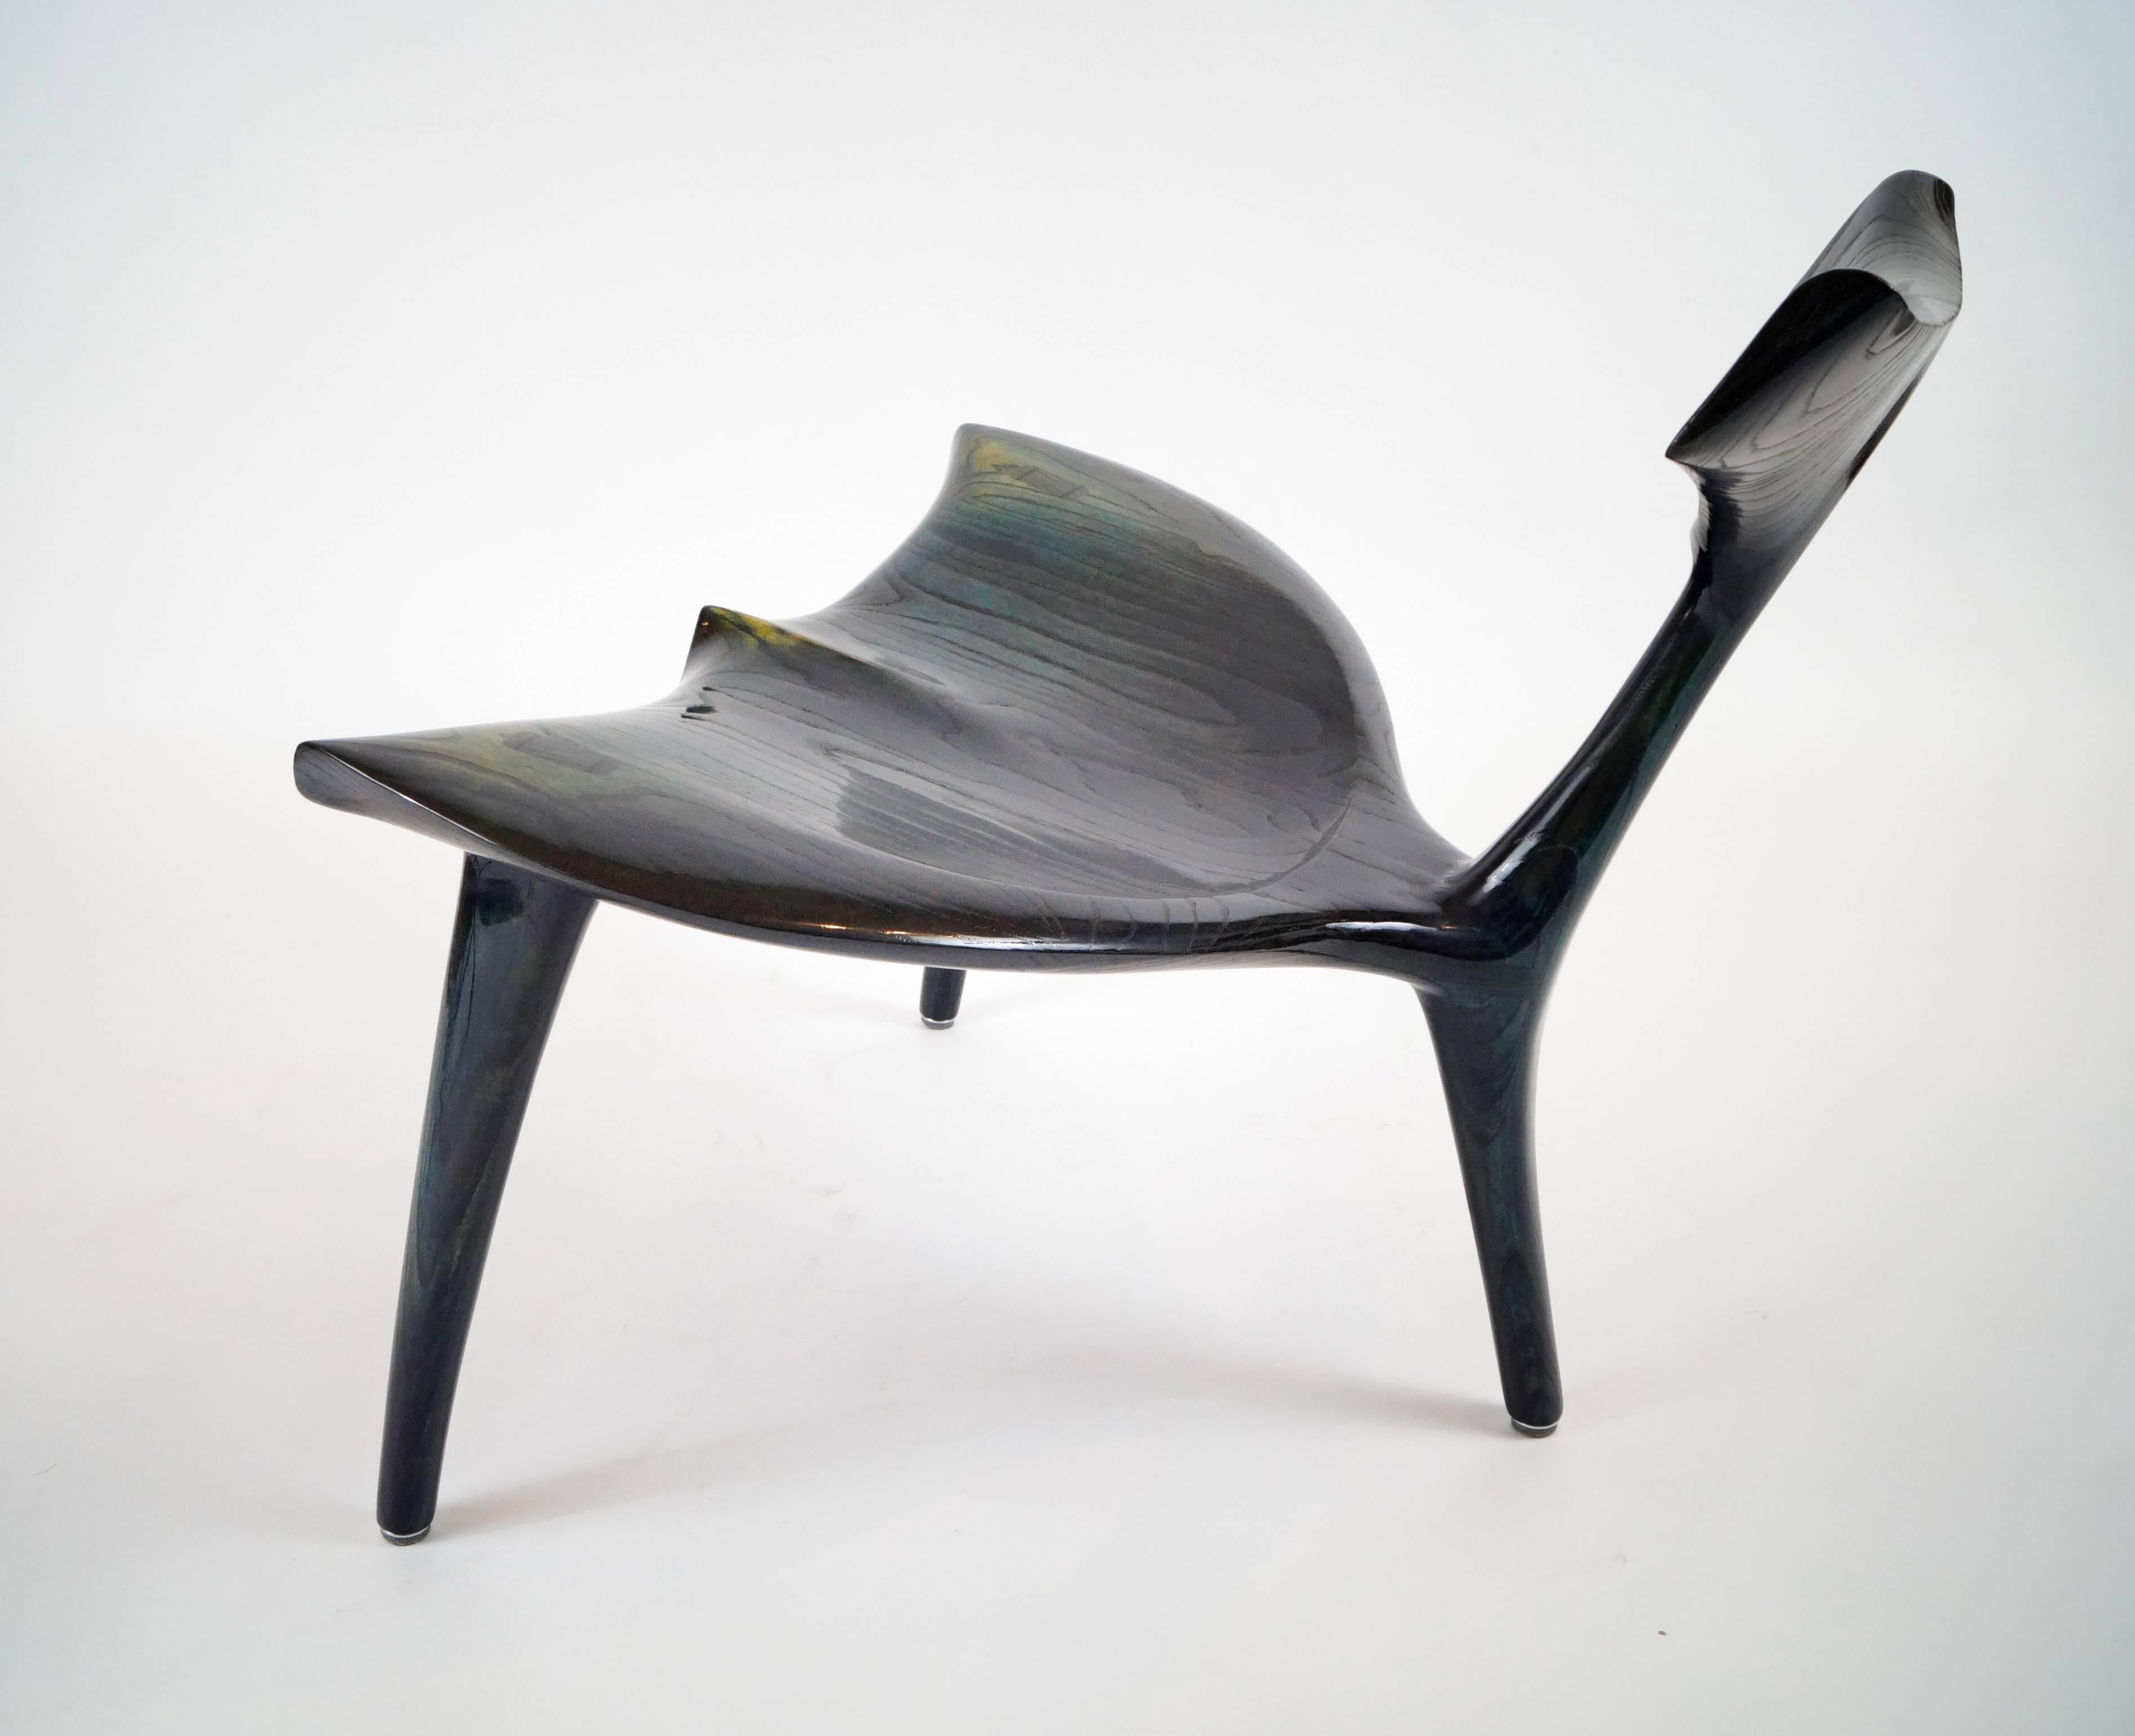 Modern Art Whale Chair MS82 Handcrafted and Designed by Morten Stenbaek